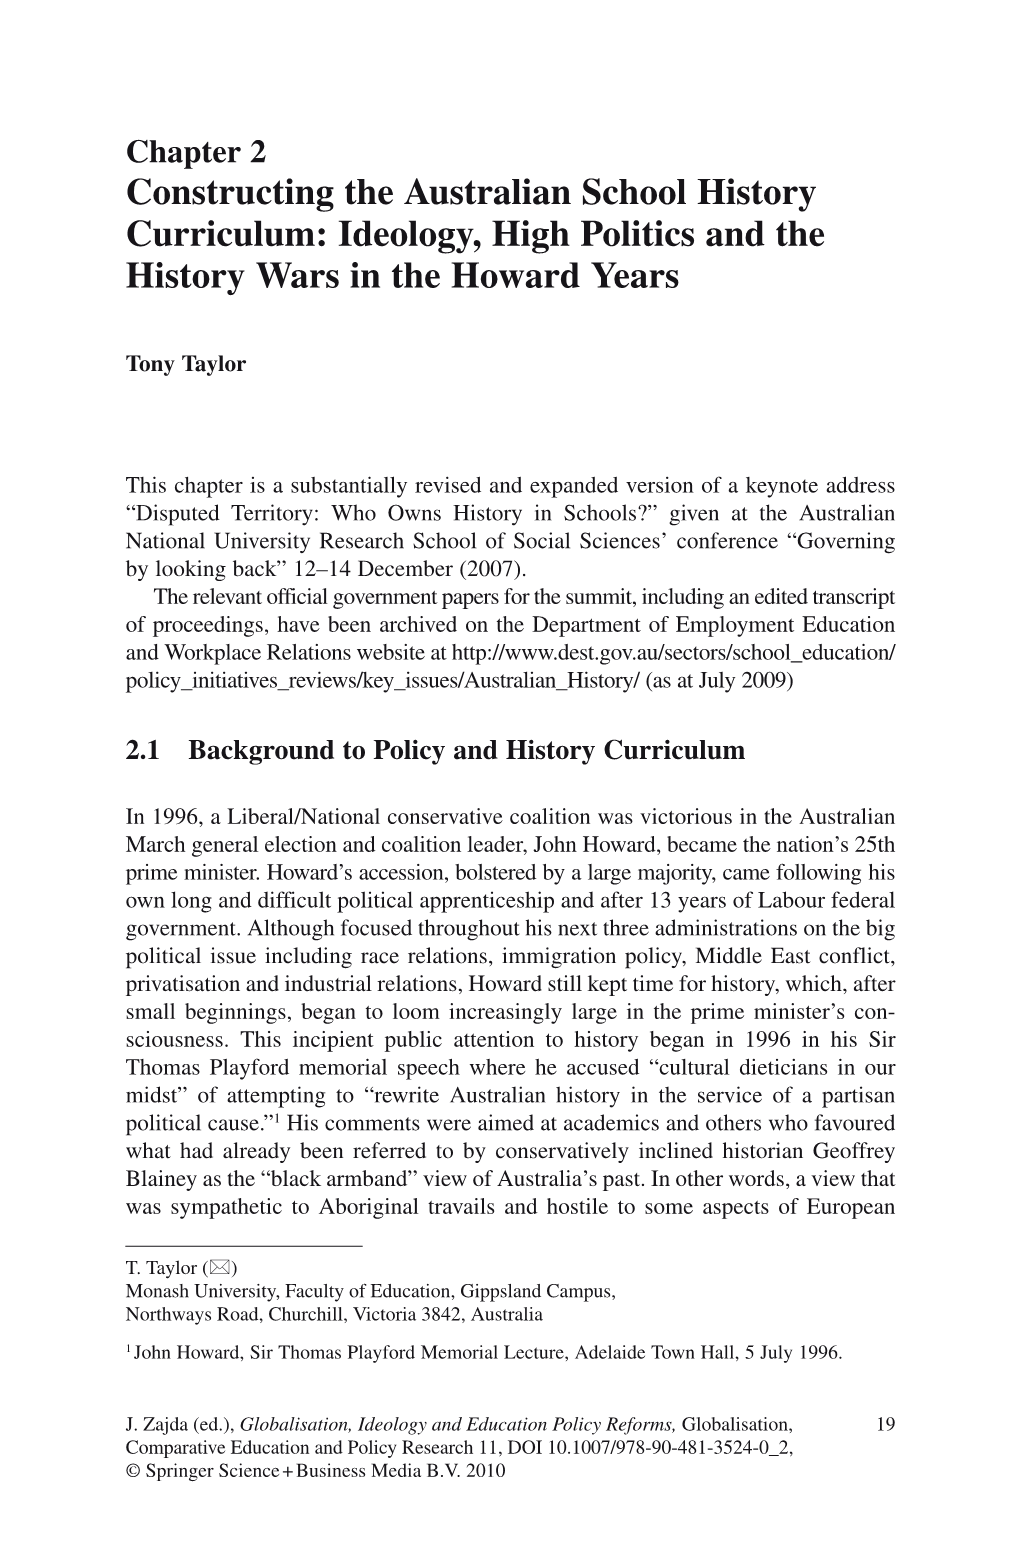 Constructing the Australian School History Curriculum: Ideology, High Politics and the History Wars in the Howard Years